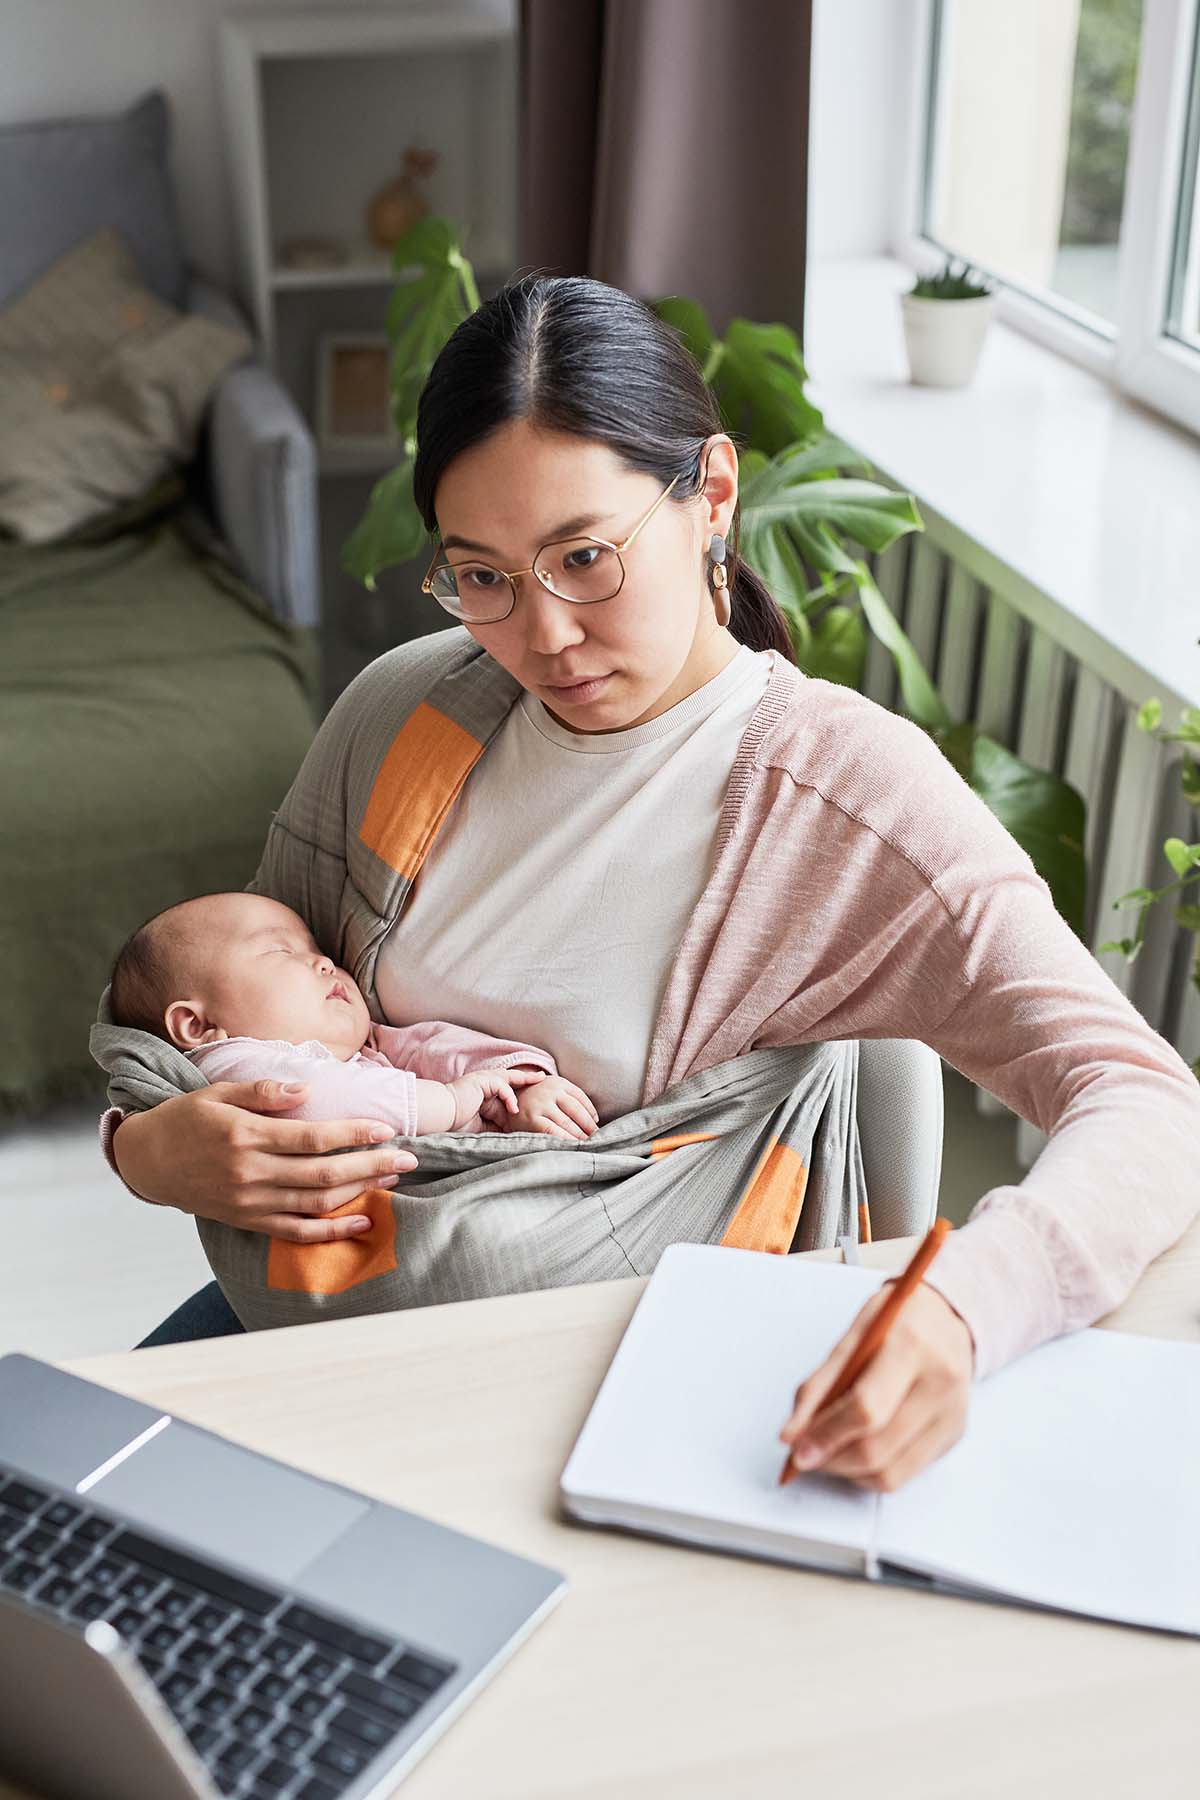 It can be difficult to decide whether or not to return to work after having a baby. As a working mother, I guarantee you've heard these things said to you! They are not helpful and you don't need to hear them. Build each other up as mothers instead of tearing each other down.